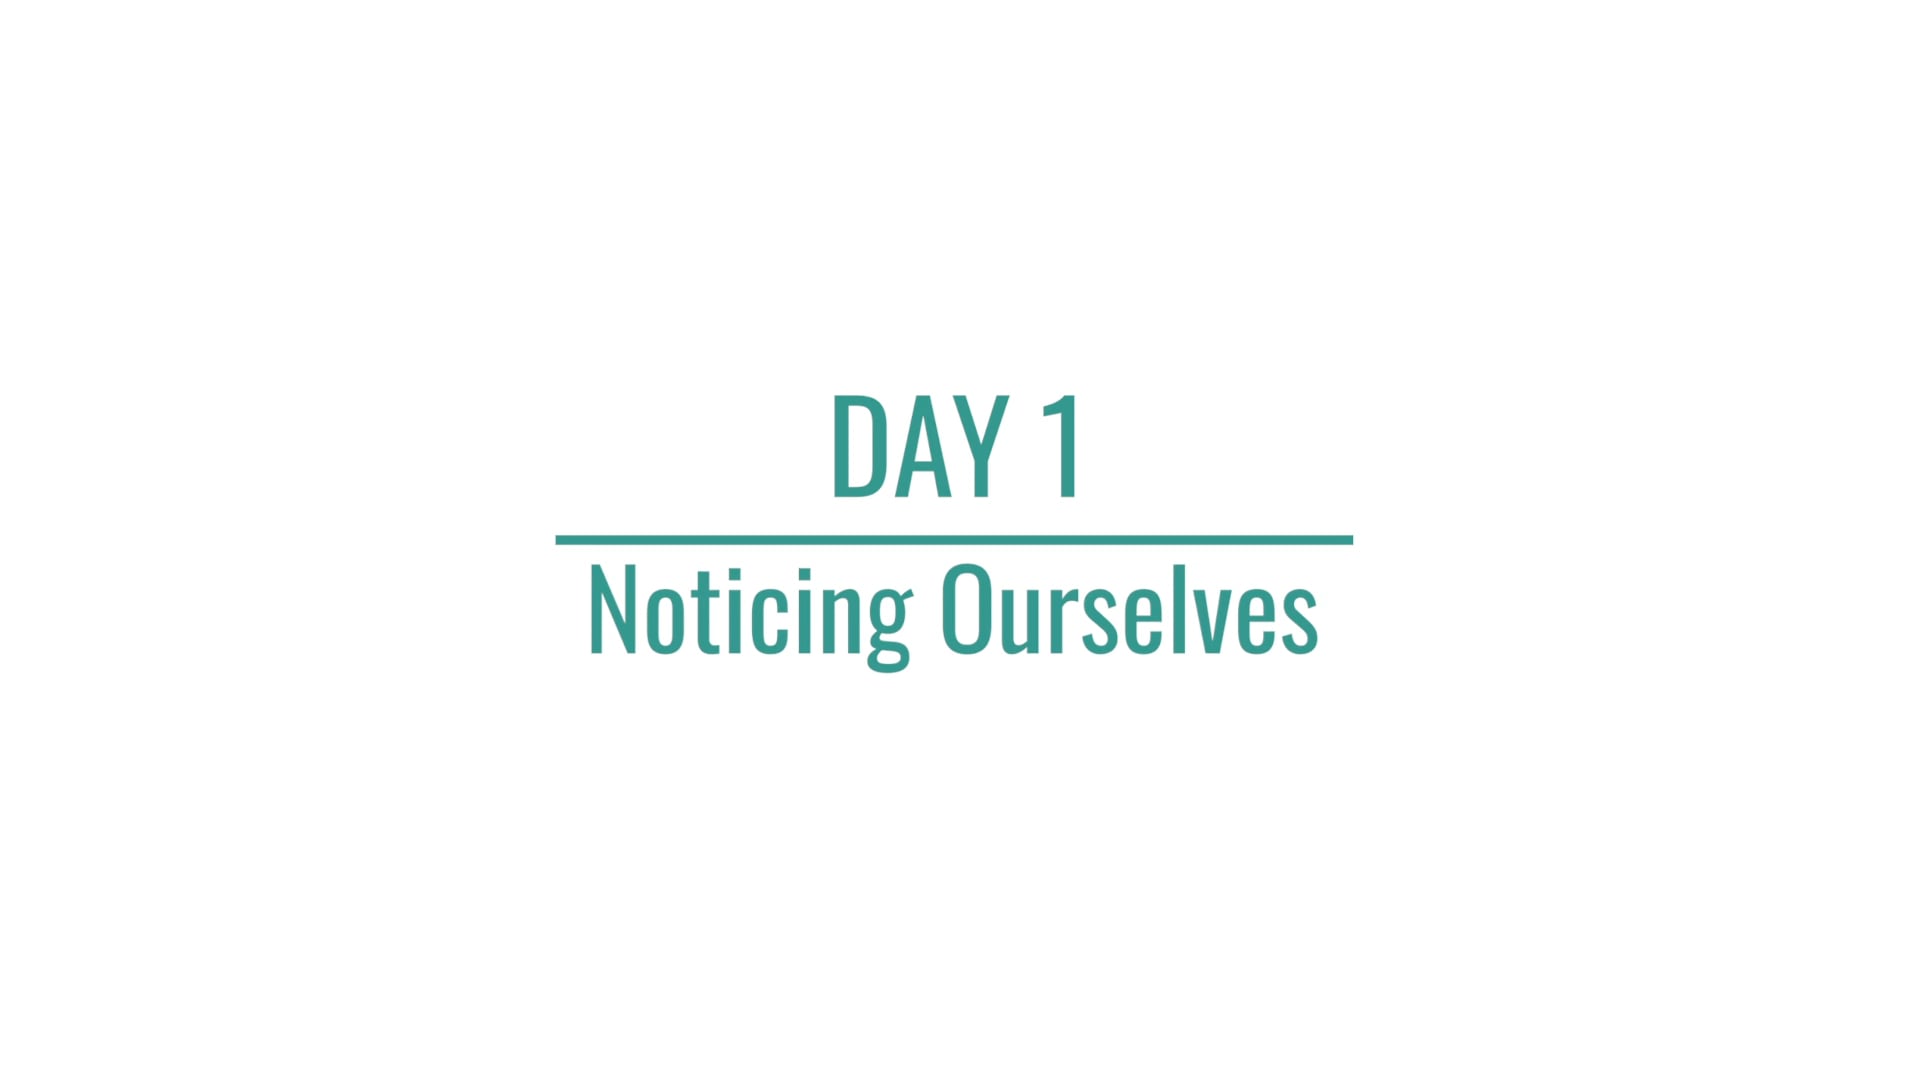 Day 1: Noticing Ourselves